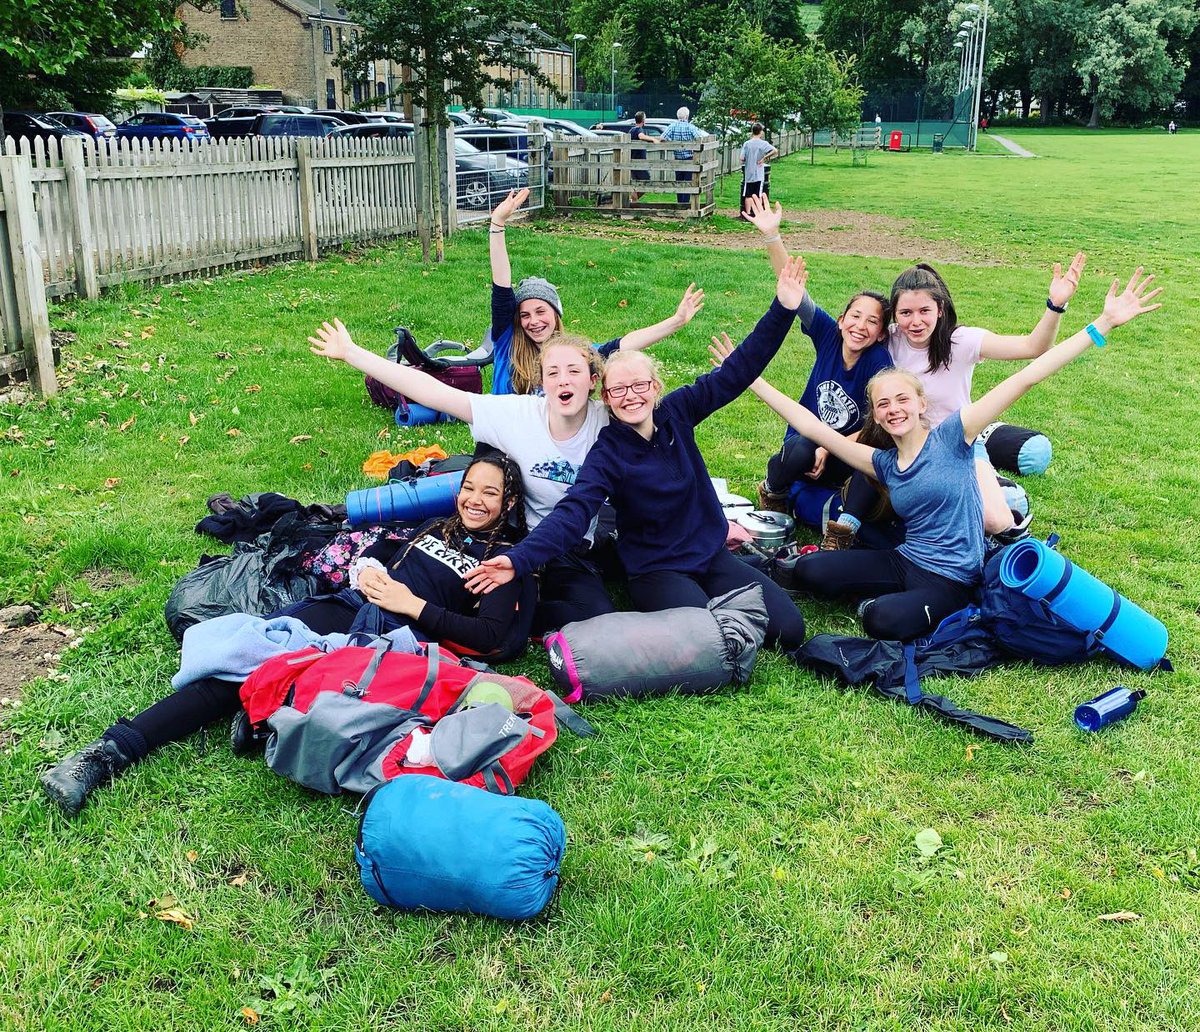 First groups are back and ALL groups have officially passed. Well done everyone... I am very proud! 👍Fantastic work all round! #bronzedofe @JohnColetSchool